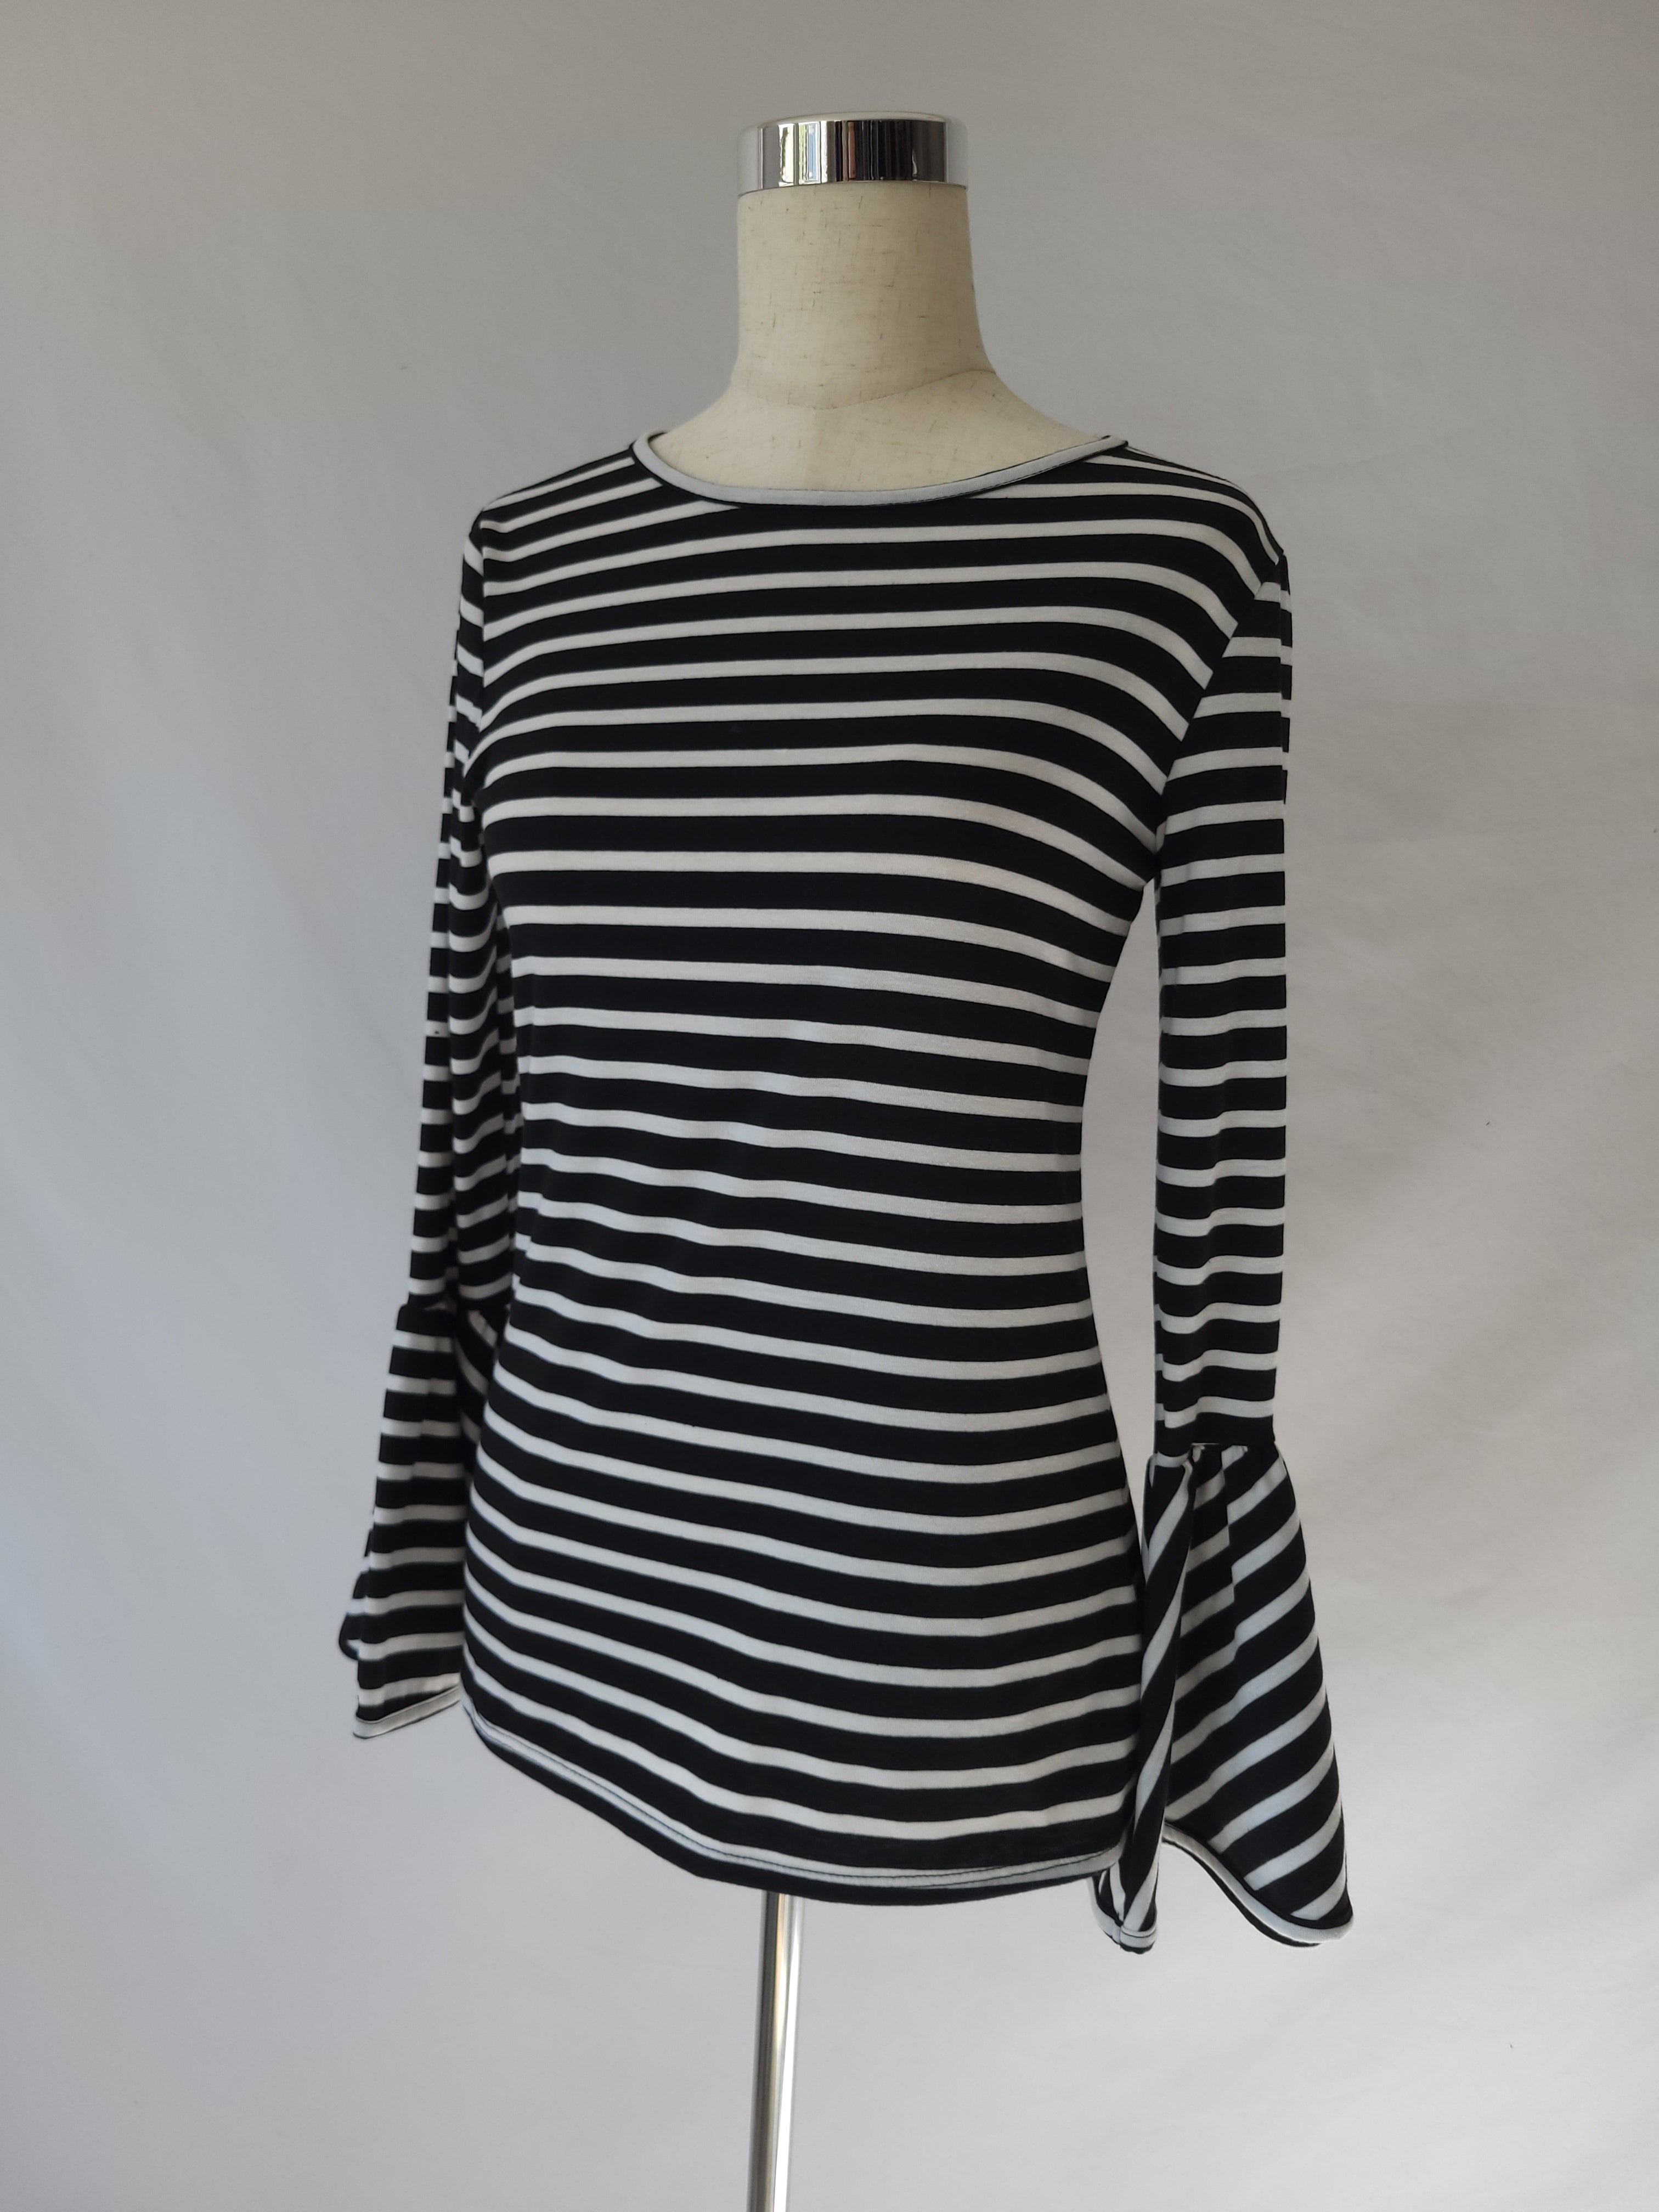 Striped Bell Sleeved Top